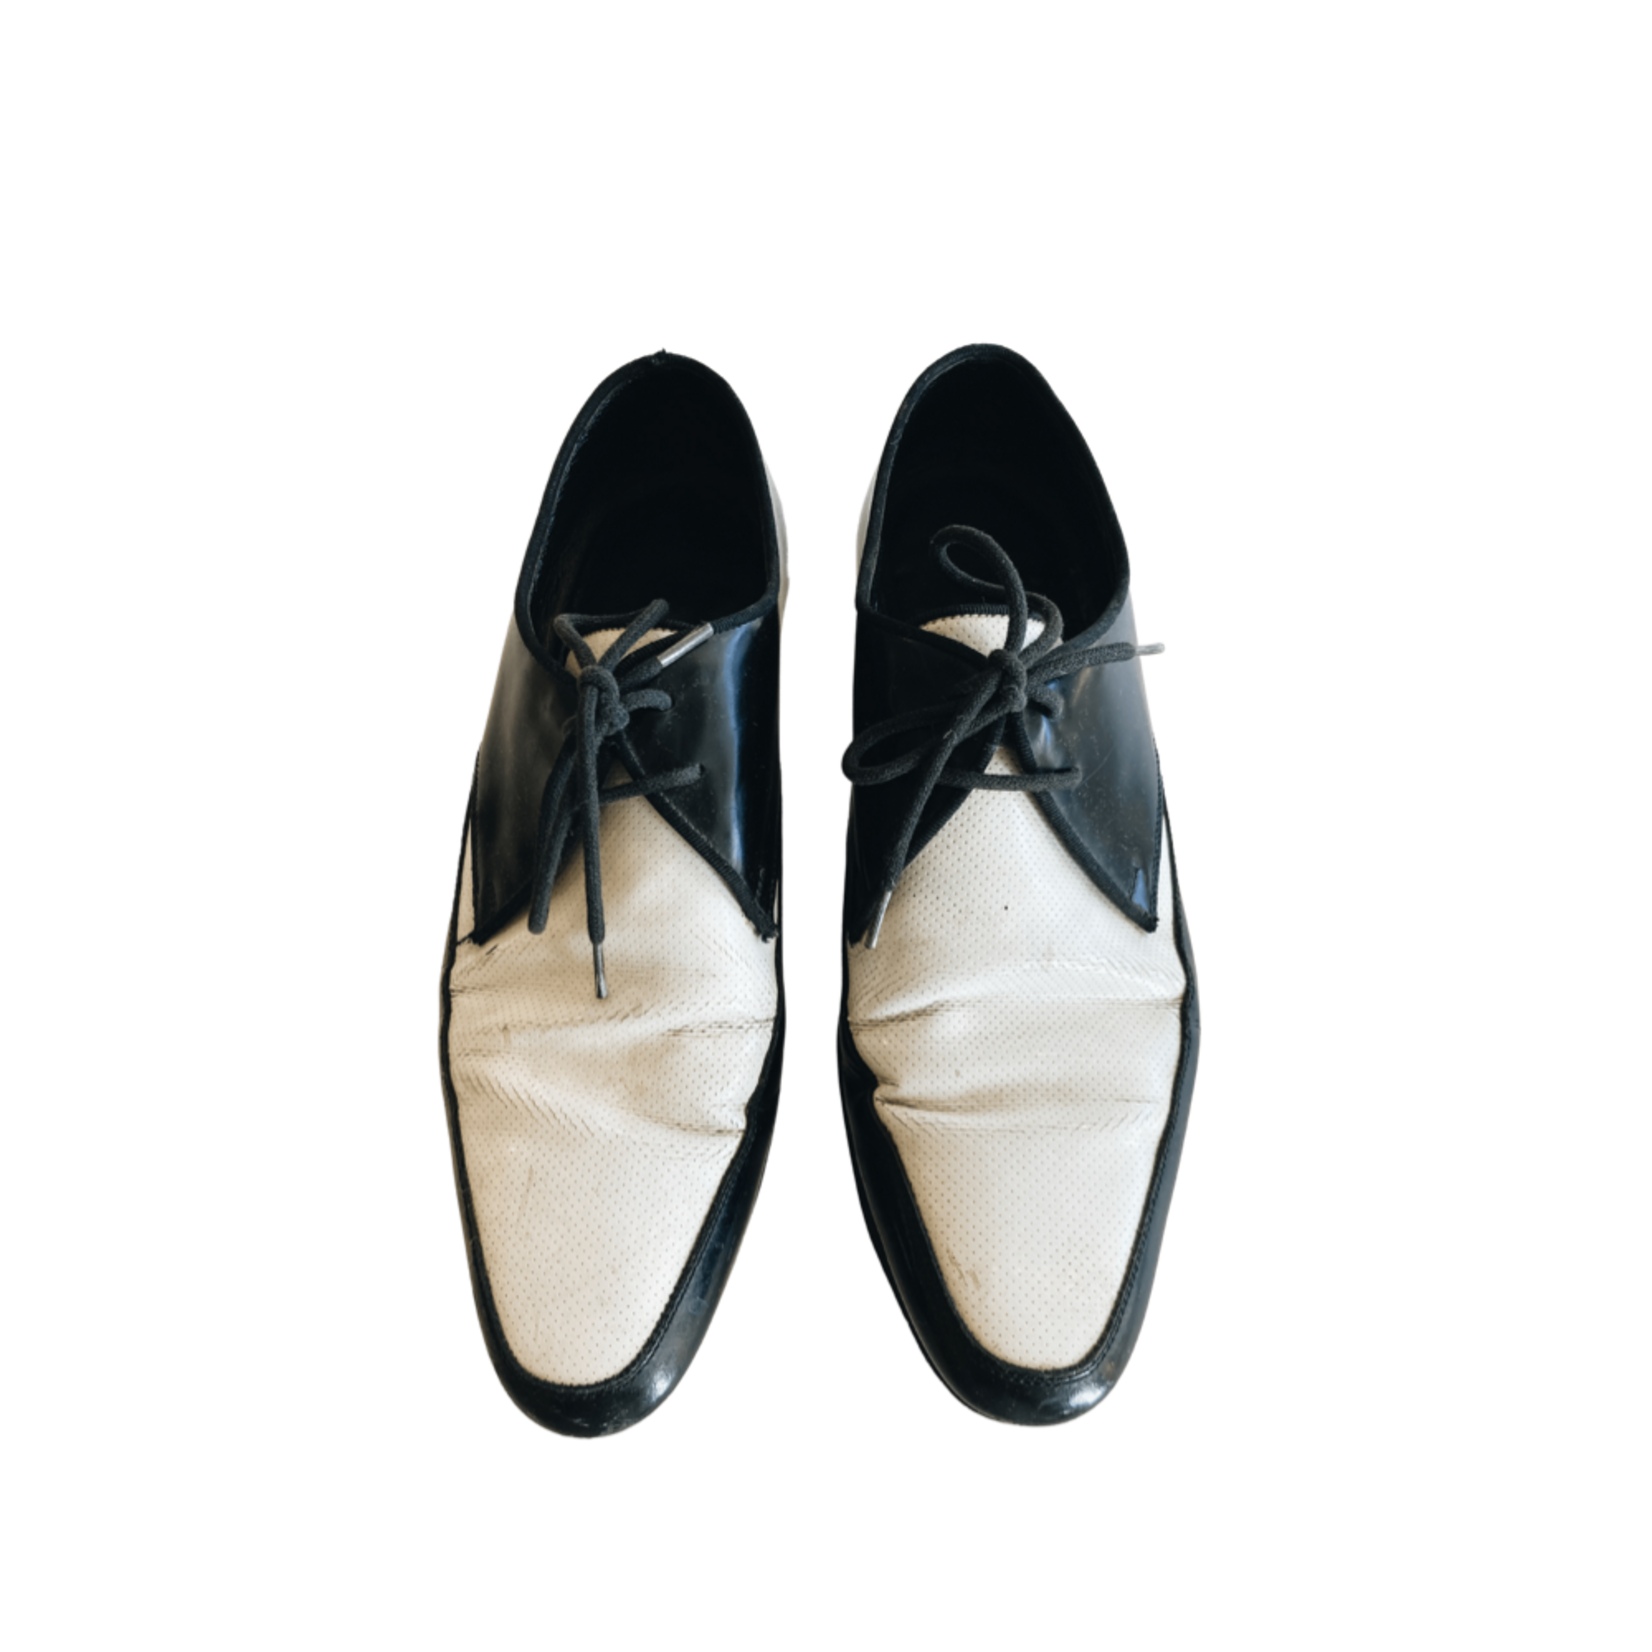 Wyld Blue Vintage Saint Laurent Lace up Loafers Black and White 35